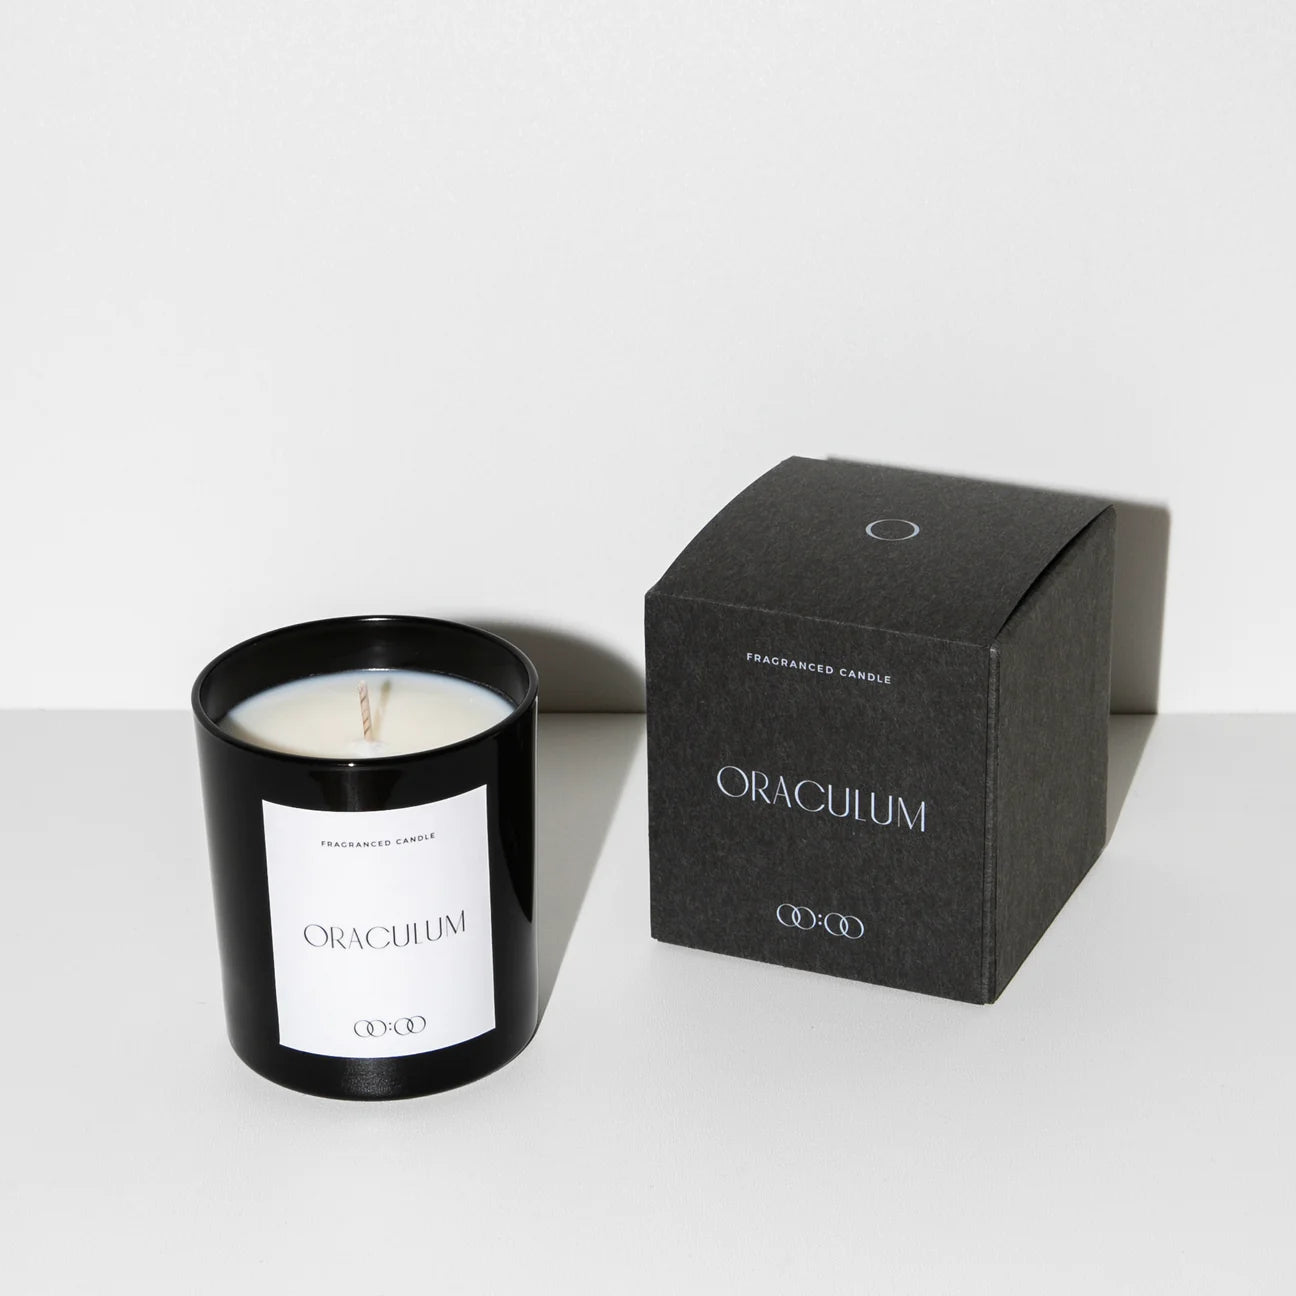 00:00 Scented Candle